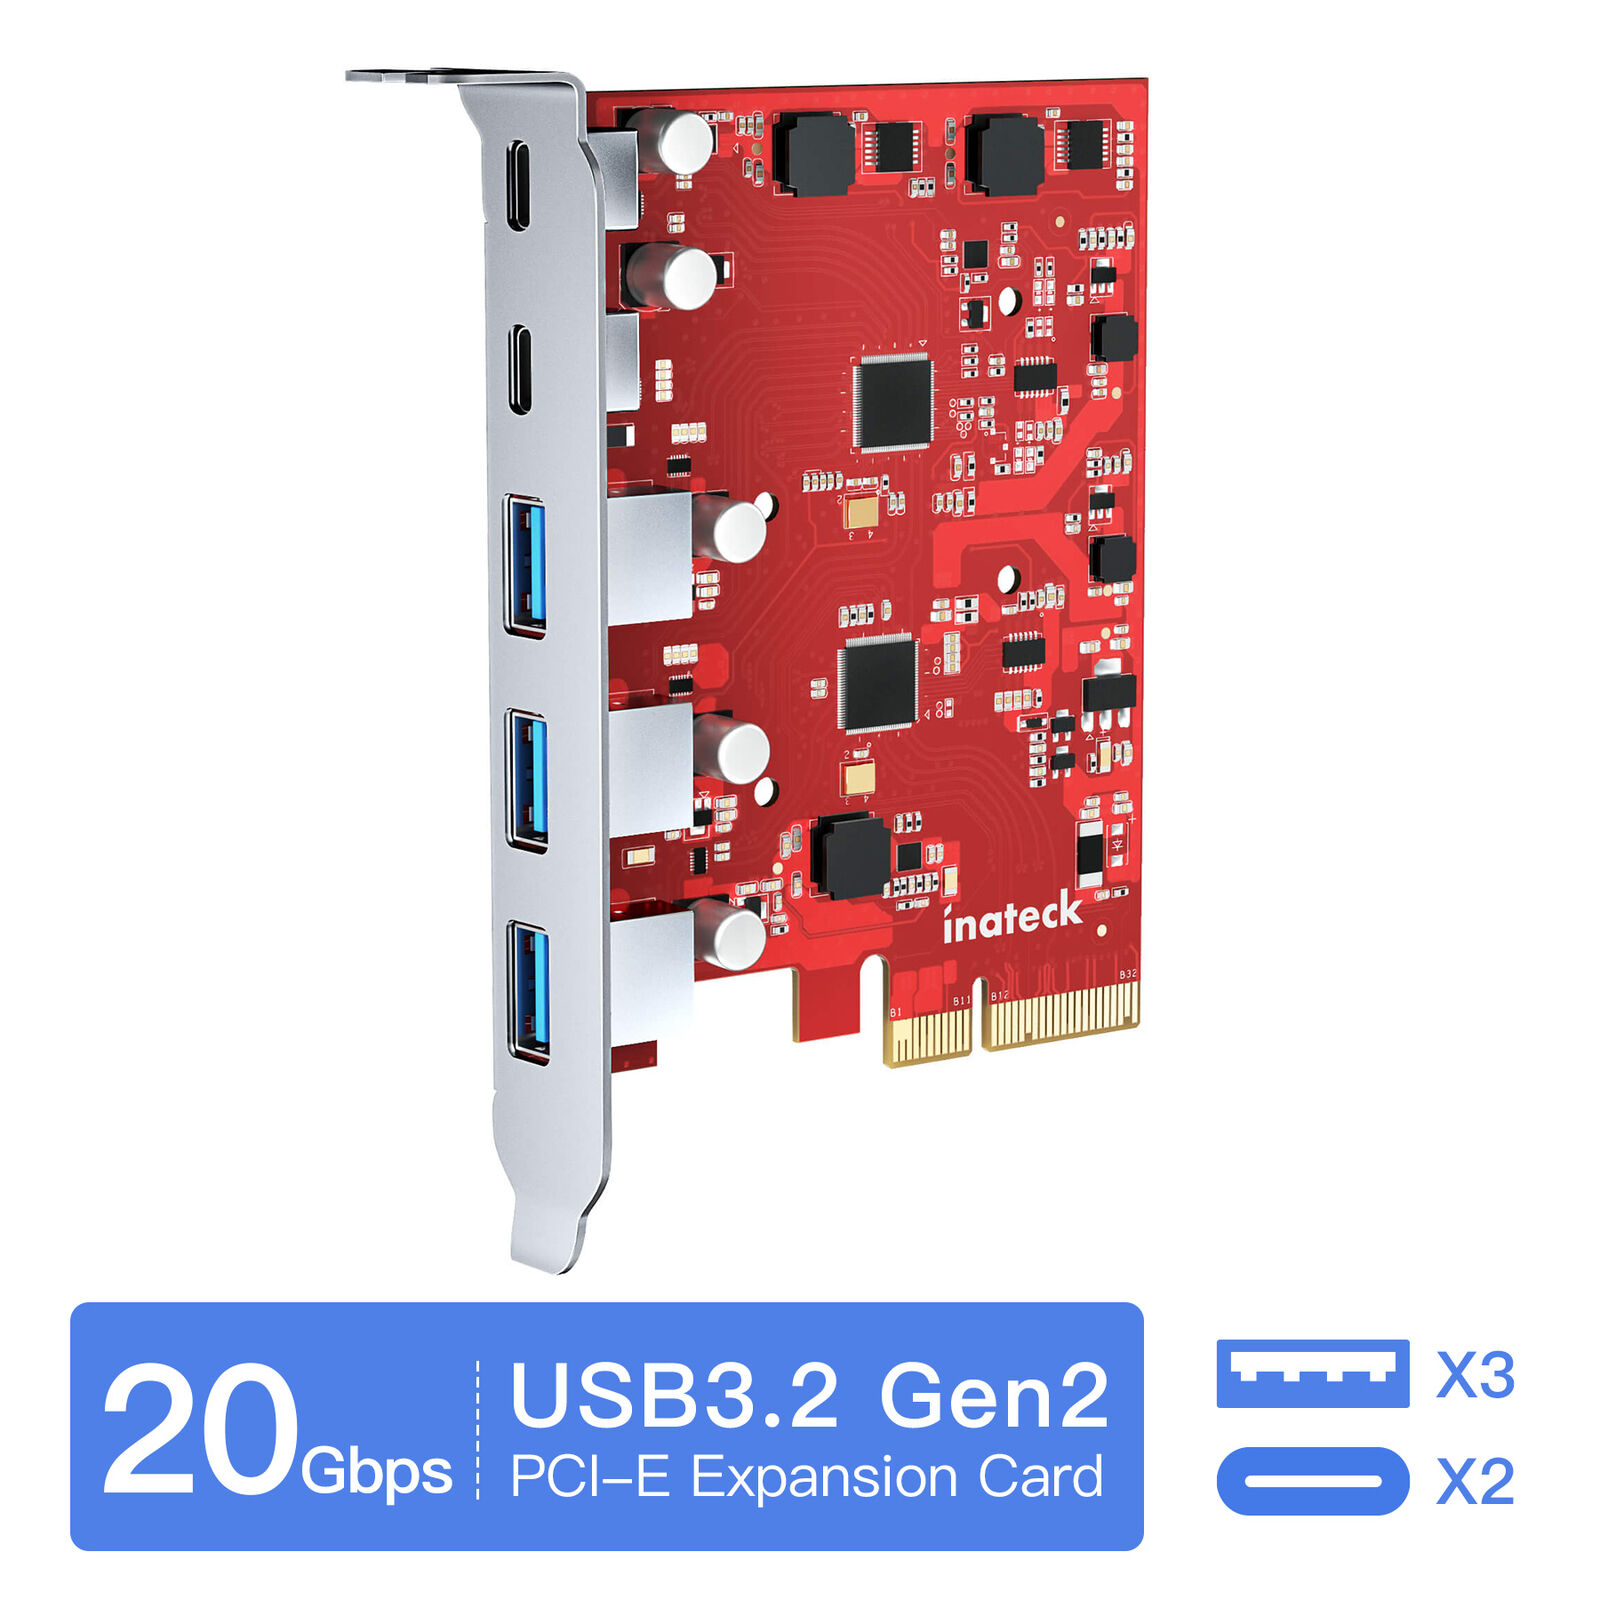 [5 port]PCIe to USB 3.2 Gen 2 Expansion Card 20Gbps Bandwidth Wide Compatibility